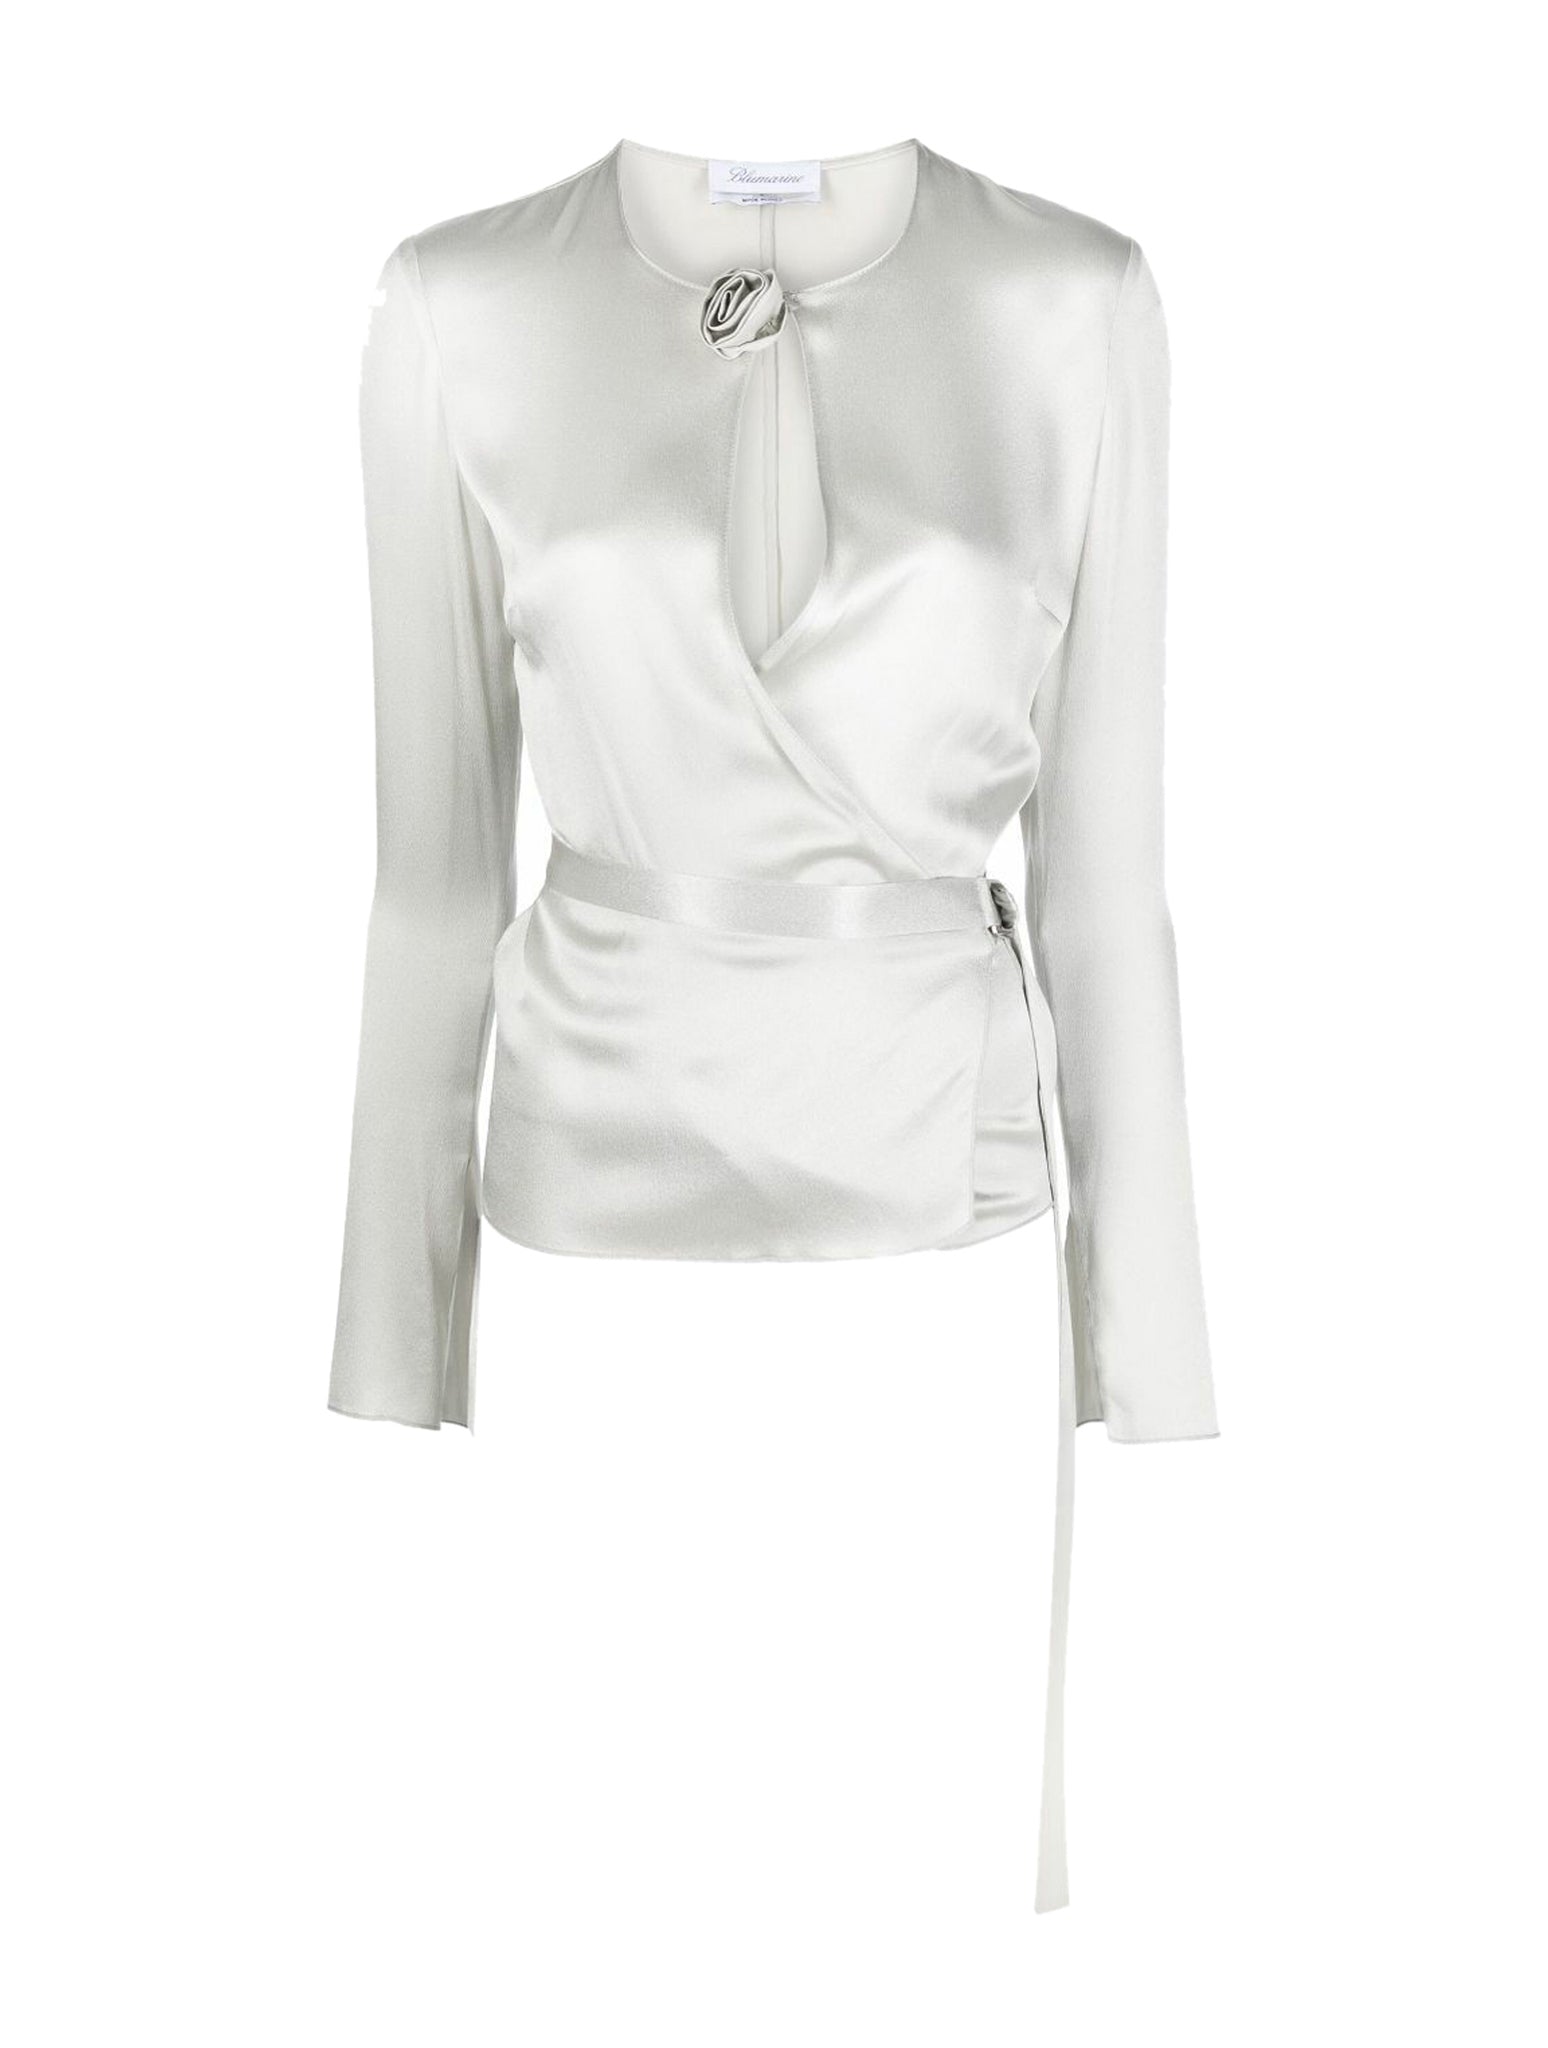 cout-out detail satin-finish blouse